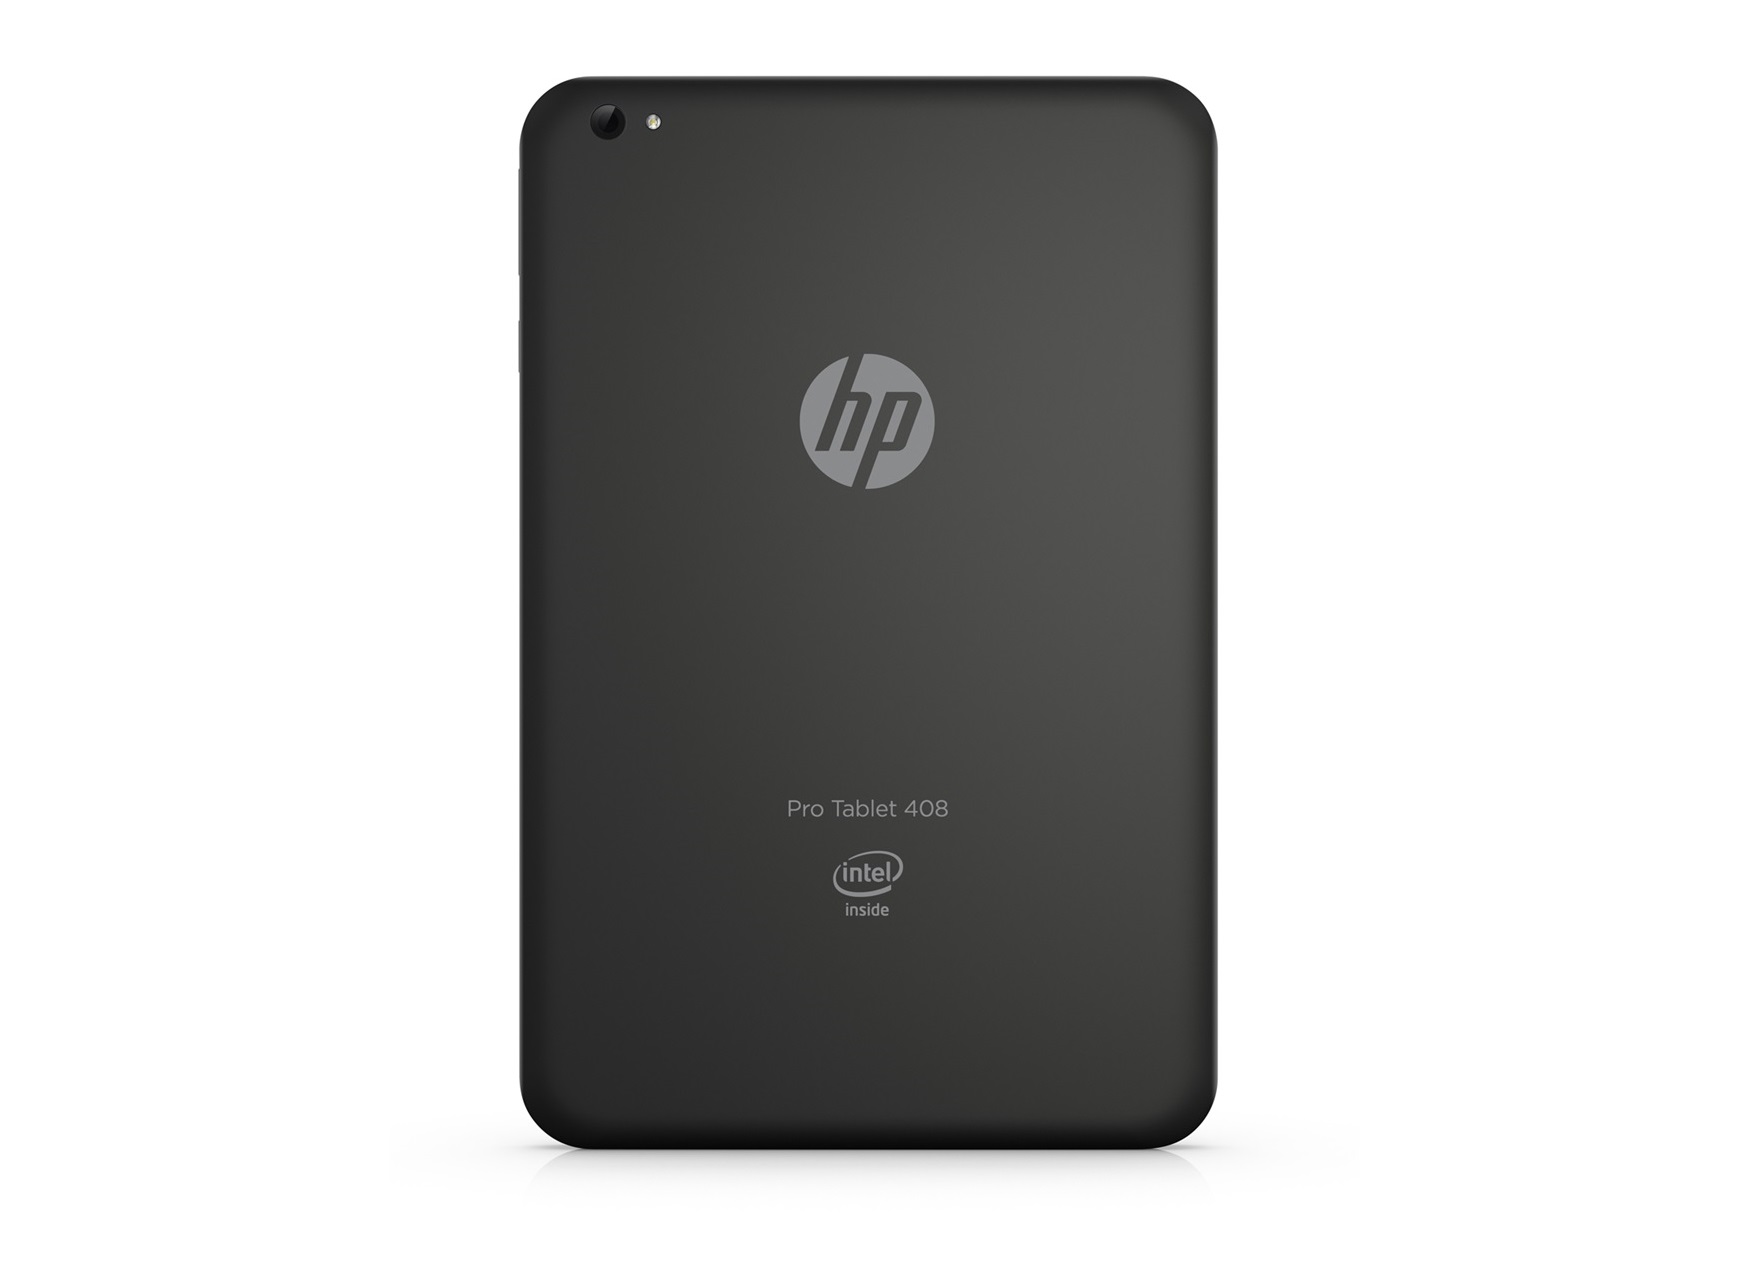 HP Pro Tablet 408 G1 Tablet Review - NotebookCheck.net Reviews